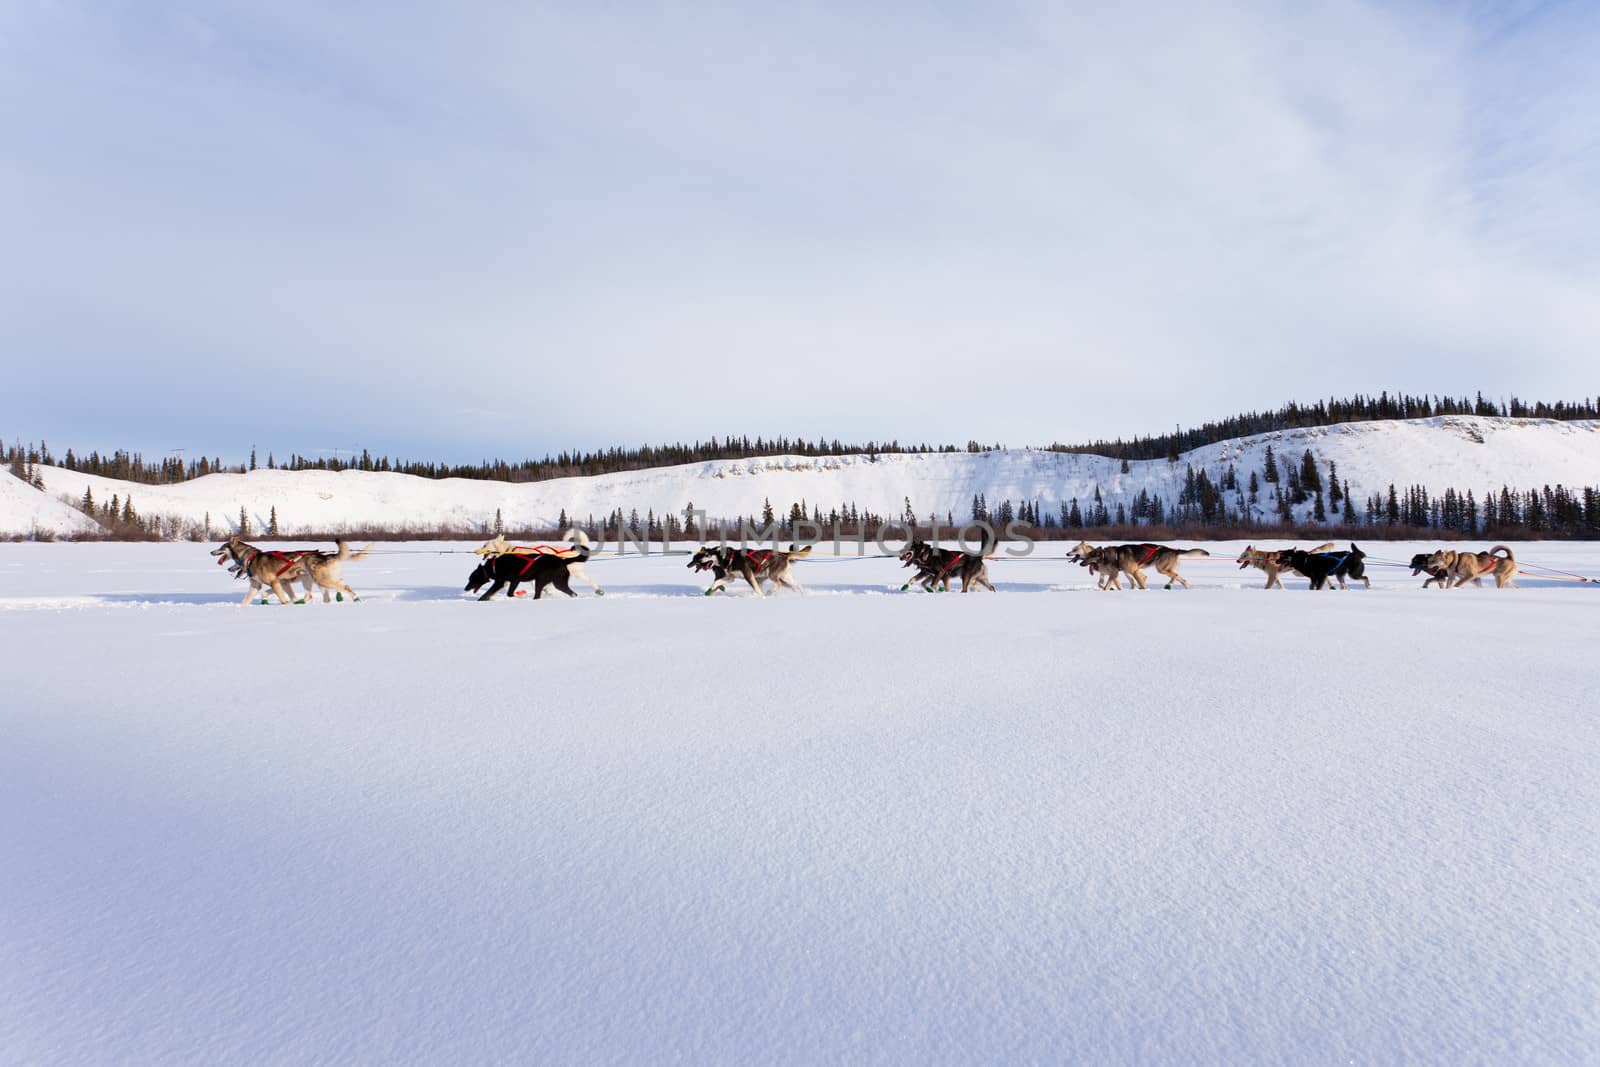 Dogsled team of siberian huskies out mushing on snow pulling a sled that is out of frame through a winter landscape